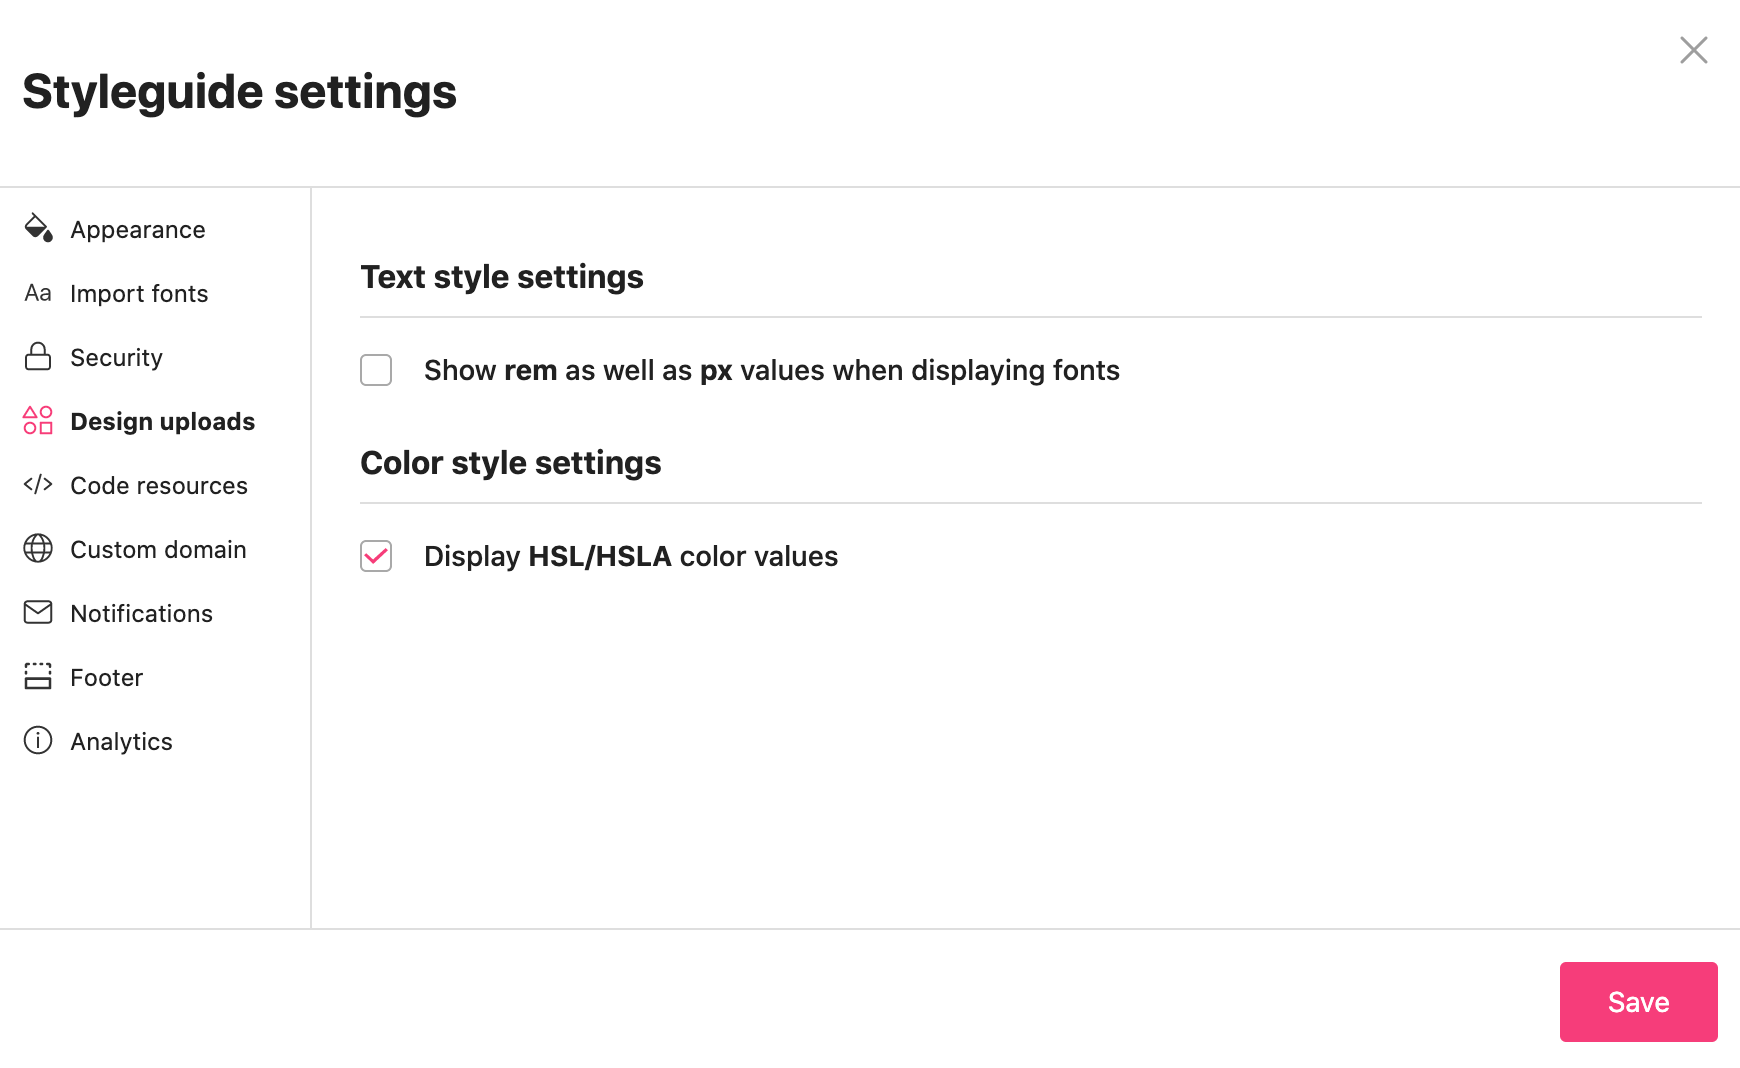 Display HSL/HSLA color values option in the Design Uploads section in the styleguide settings.